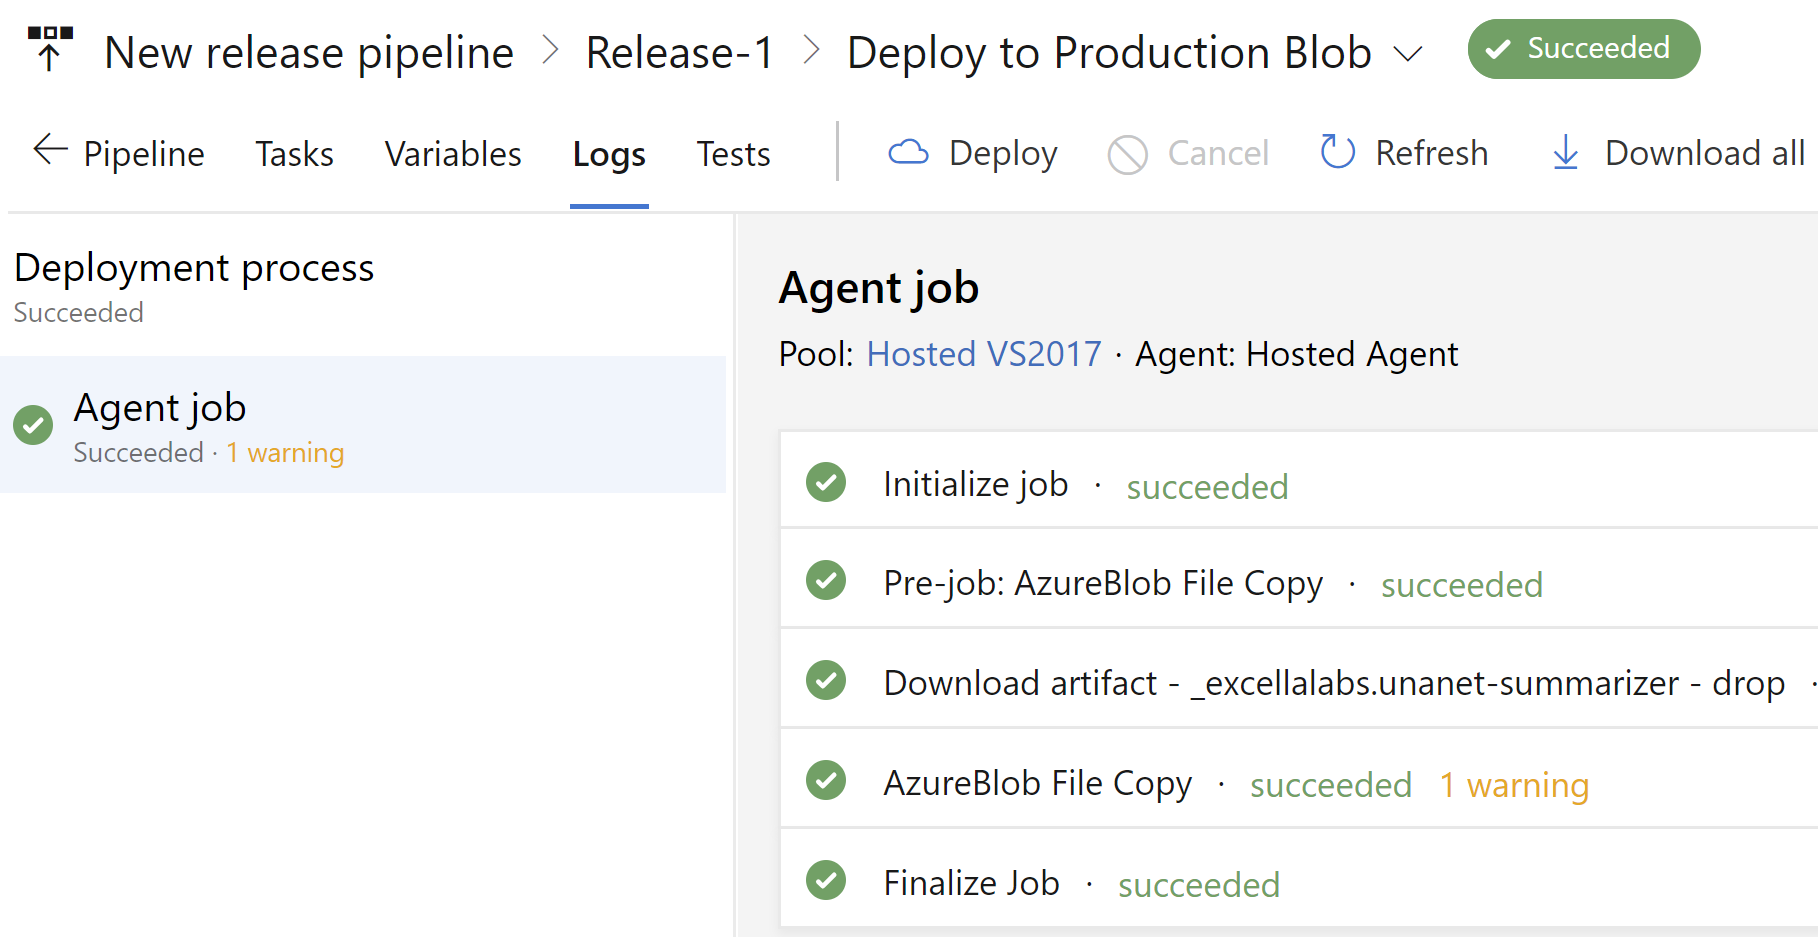 a release summary showing all the tasks were successful